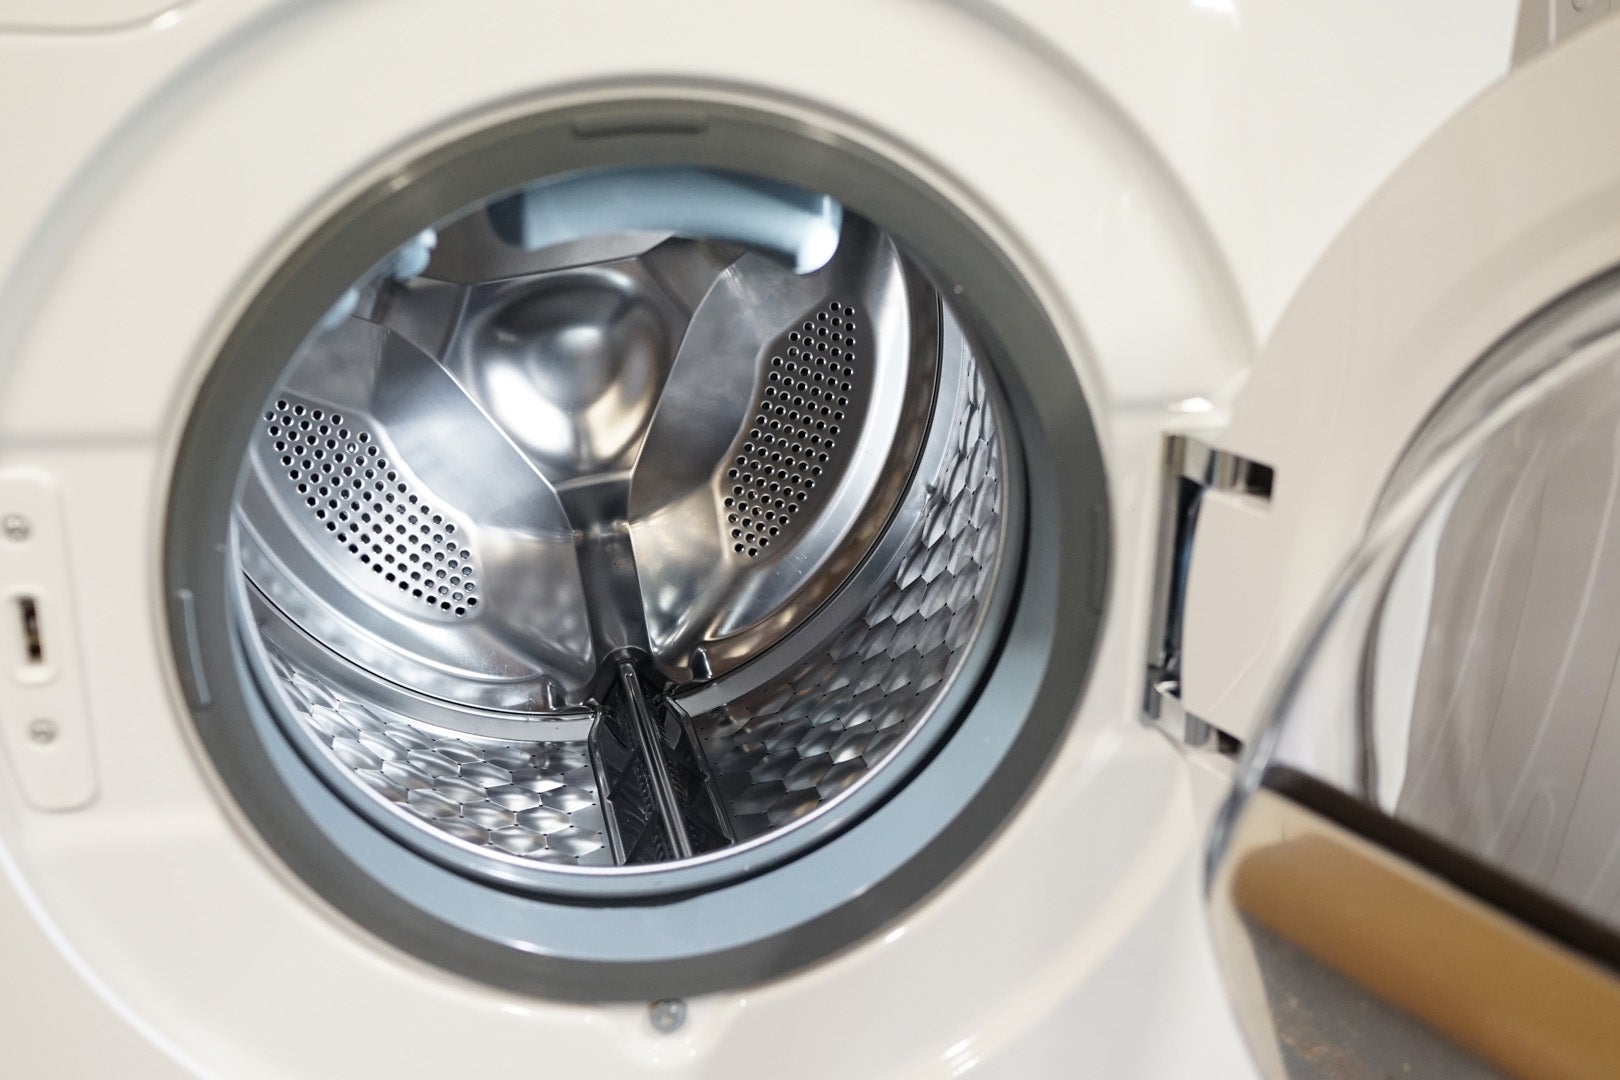 Close-up view inside Miele WTH120 washer-dryer drum.